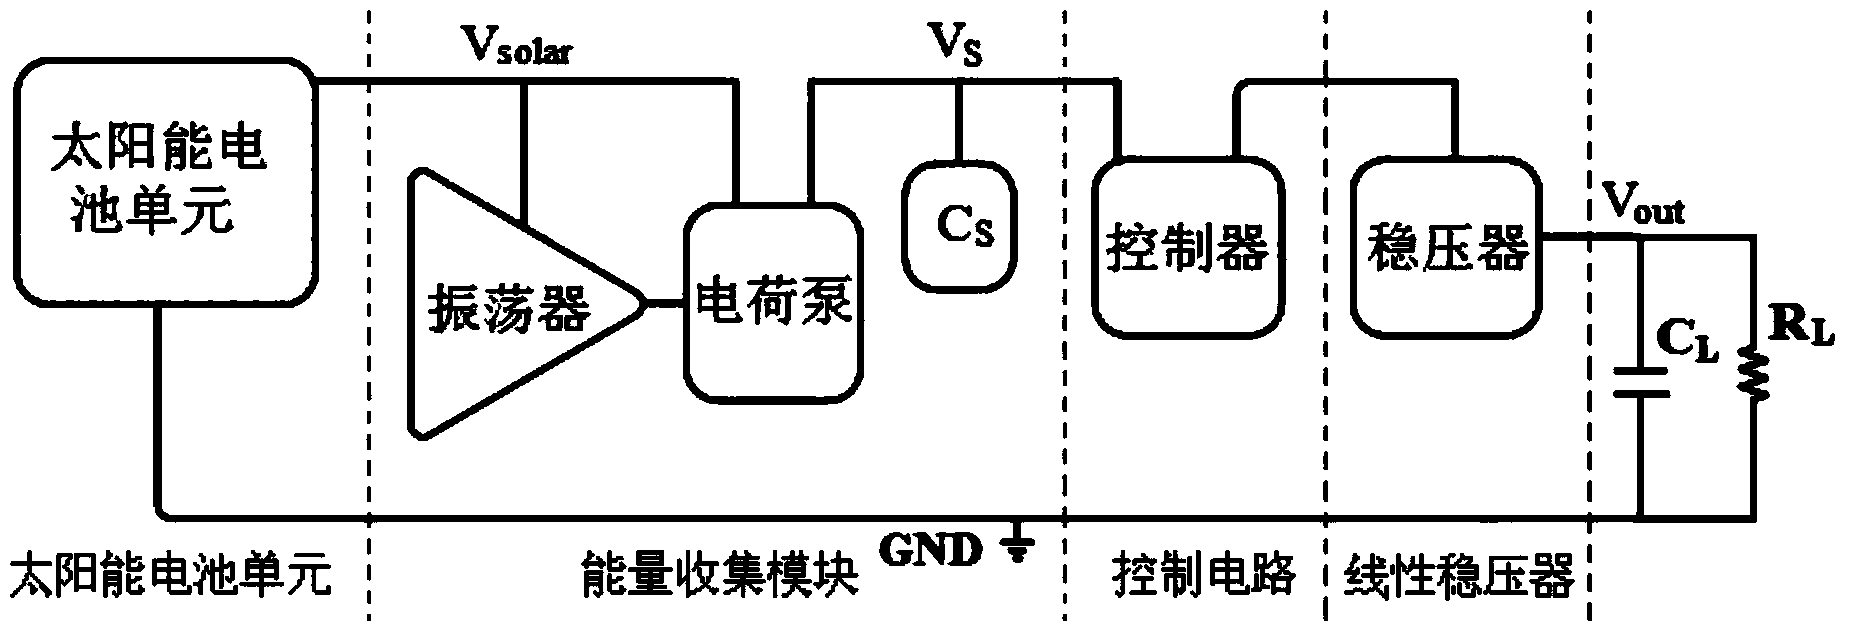 Integrated on-chip solar cell power supply system